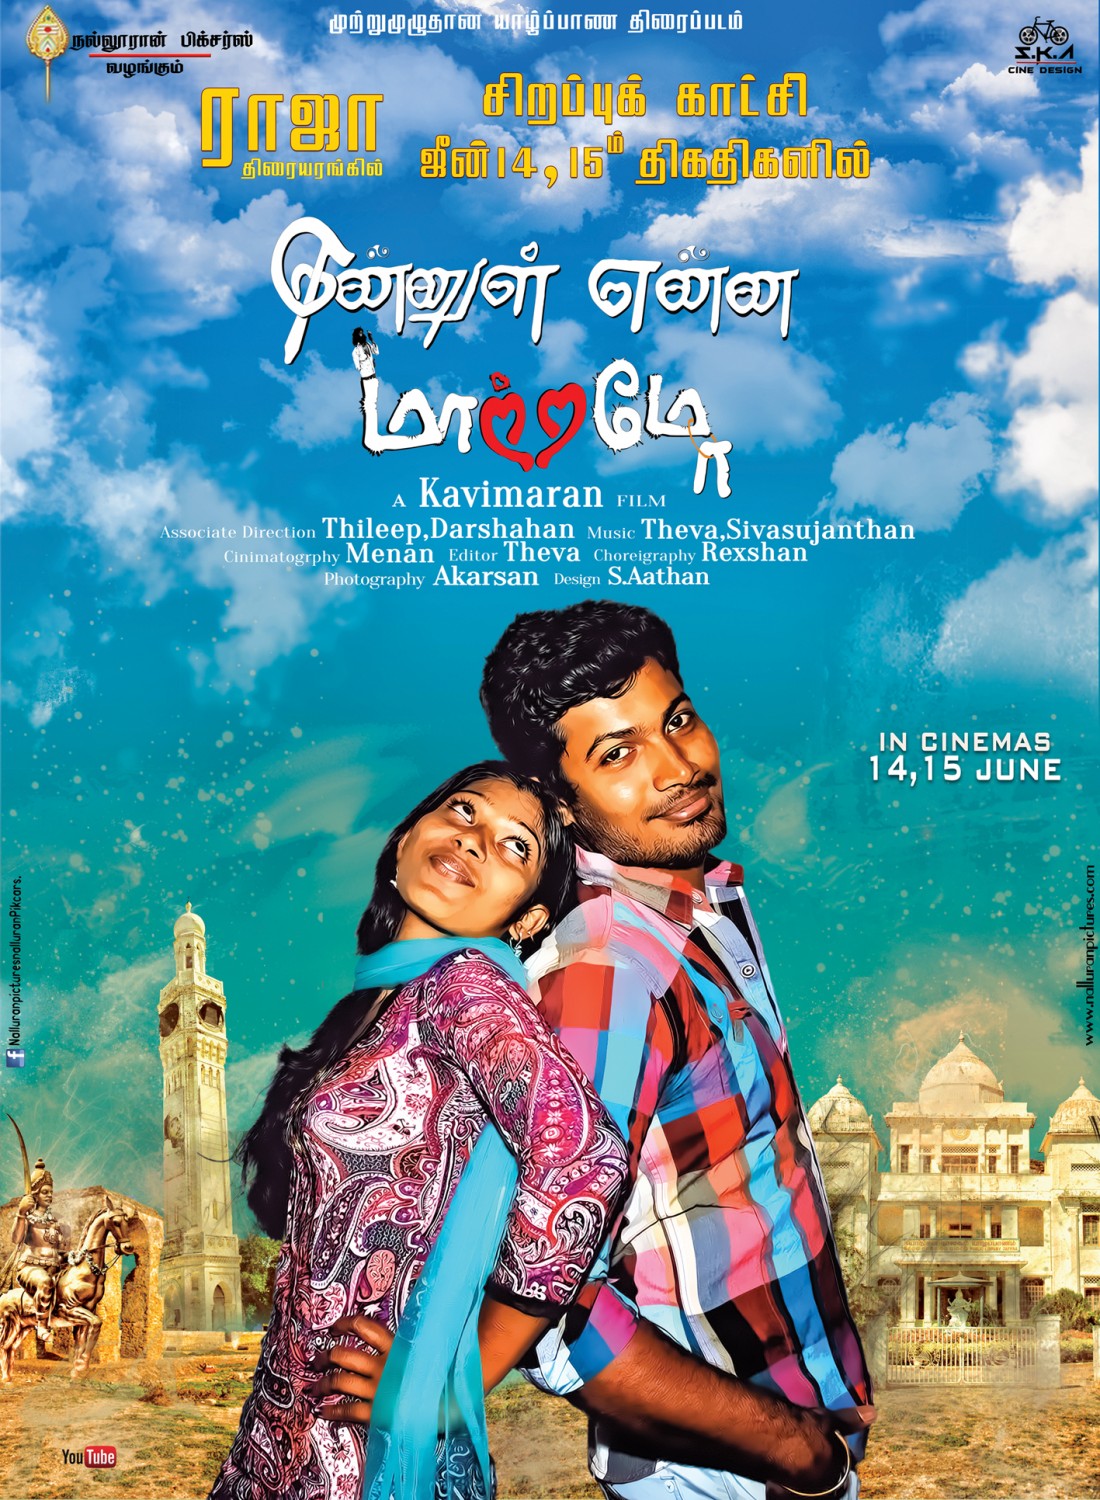 Extra Large Movie Poster Image for Ennul Enna Matramo 